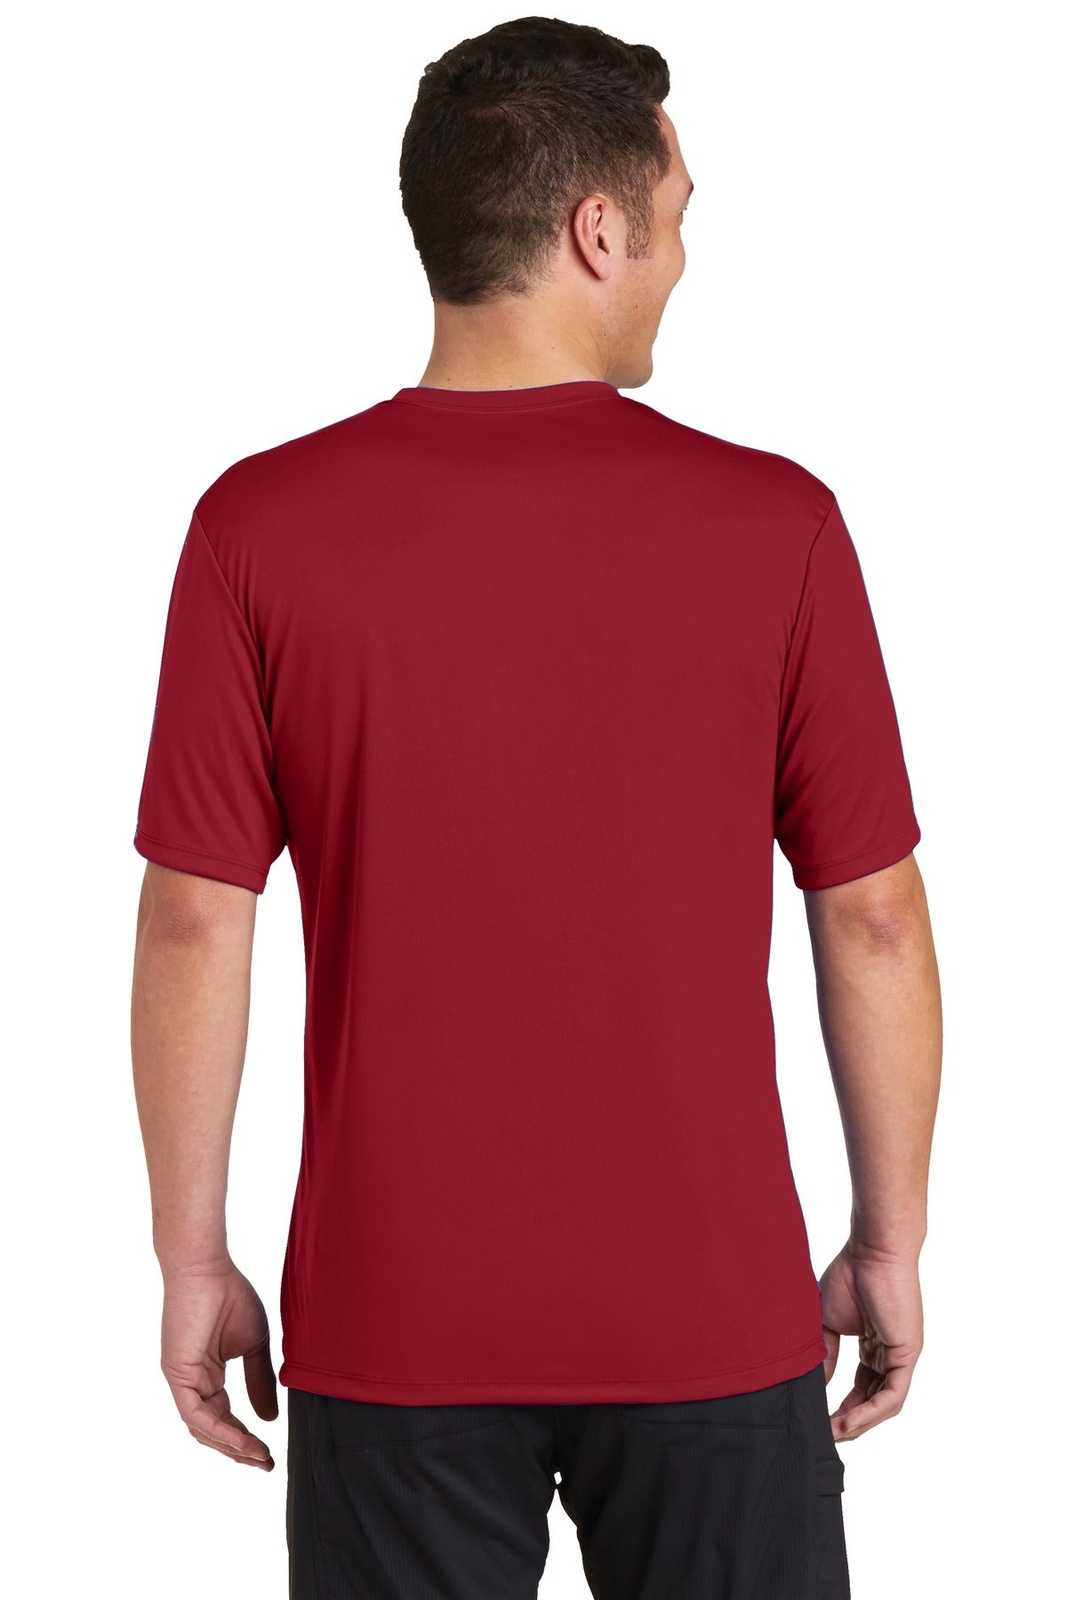 Hanes 4820 Cool Dri Performance T-Shirt - Deep Red - HIT a Double